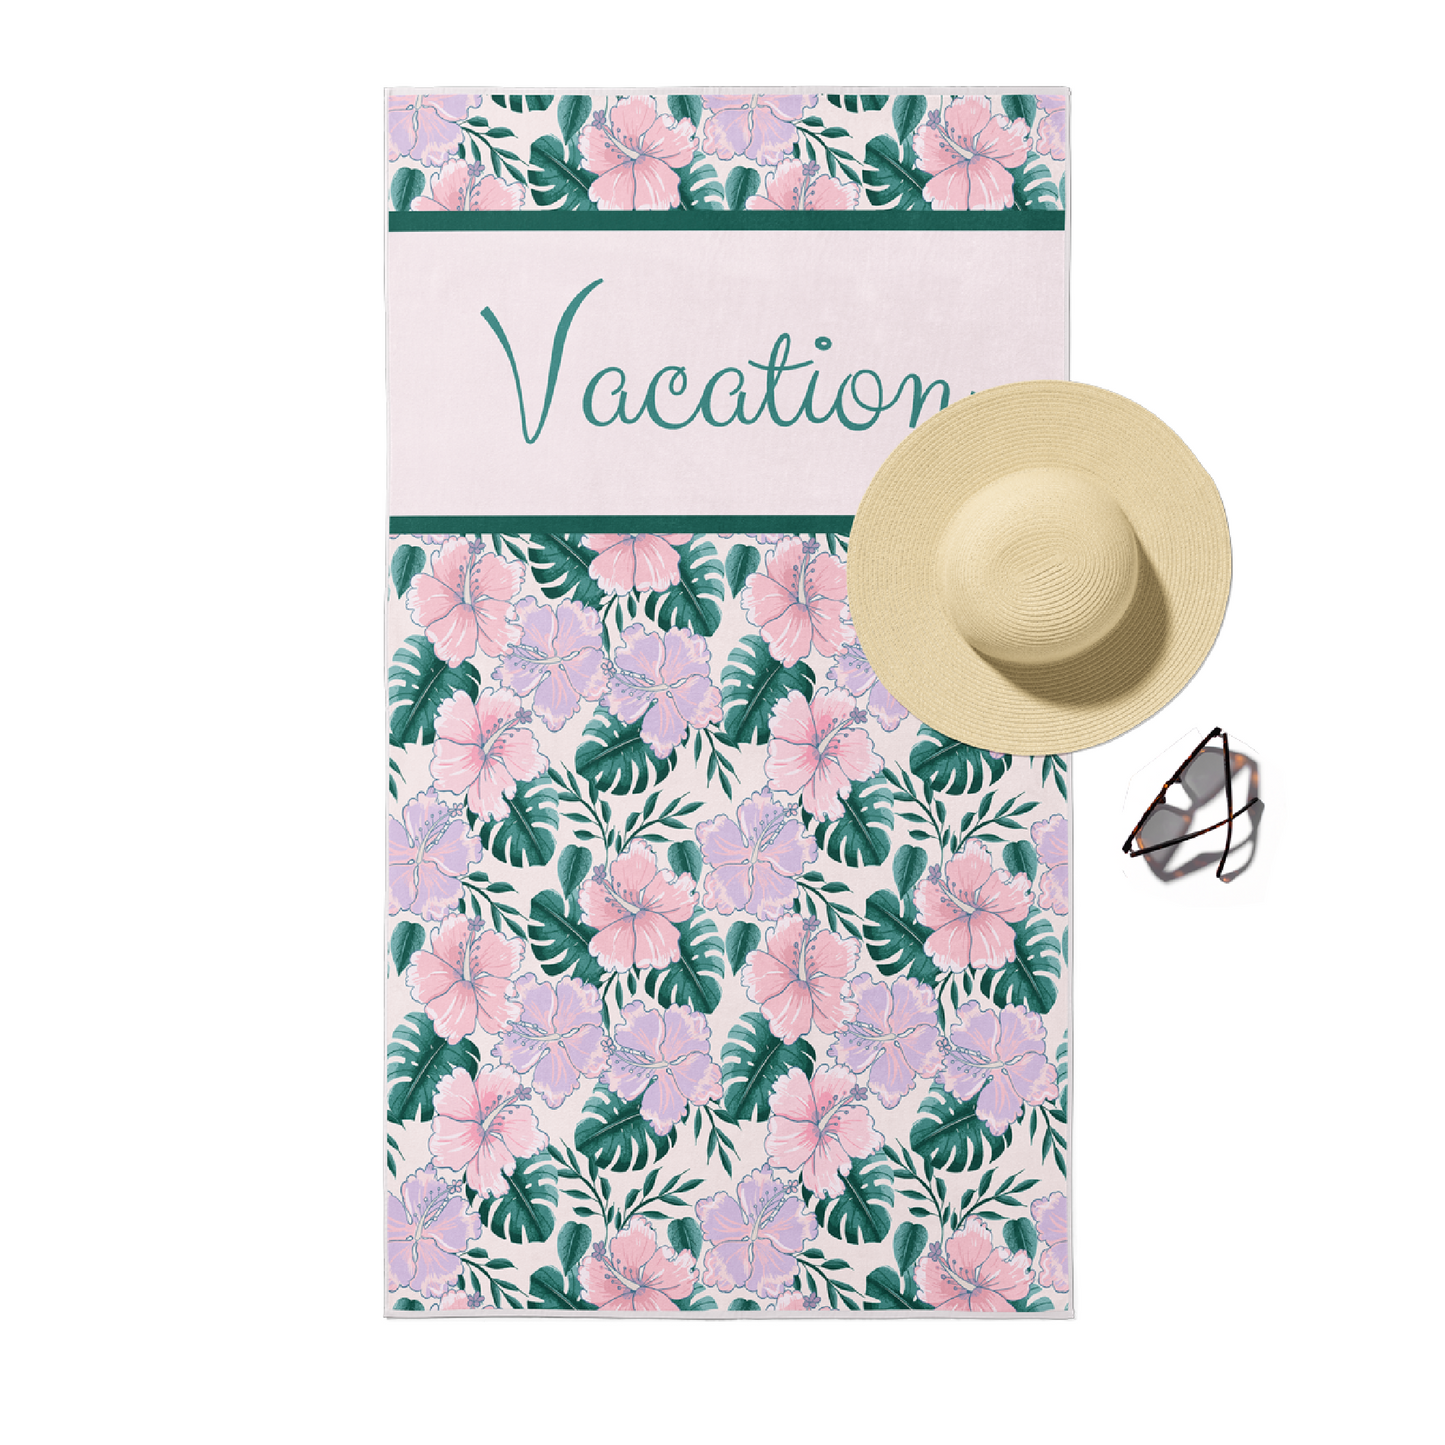 Beach towel in light pink and lavender floral print with green customizable text.